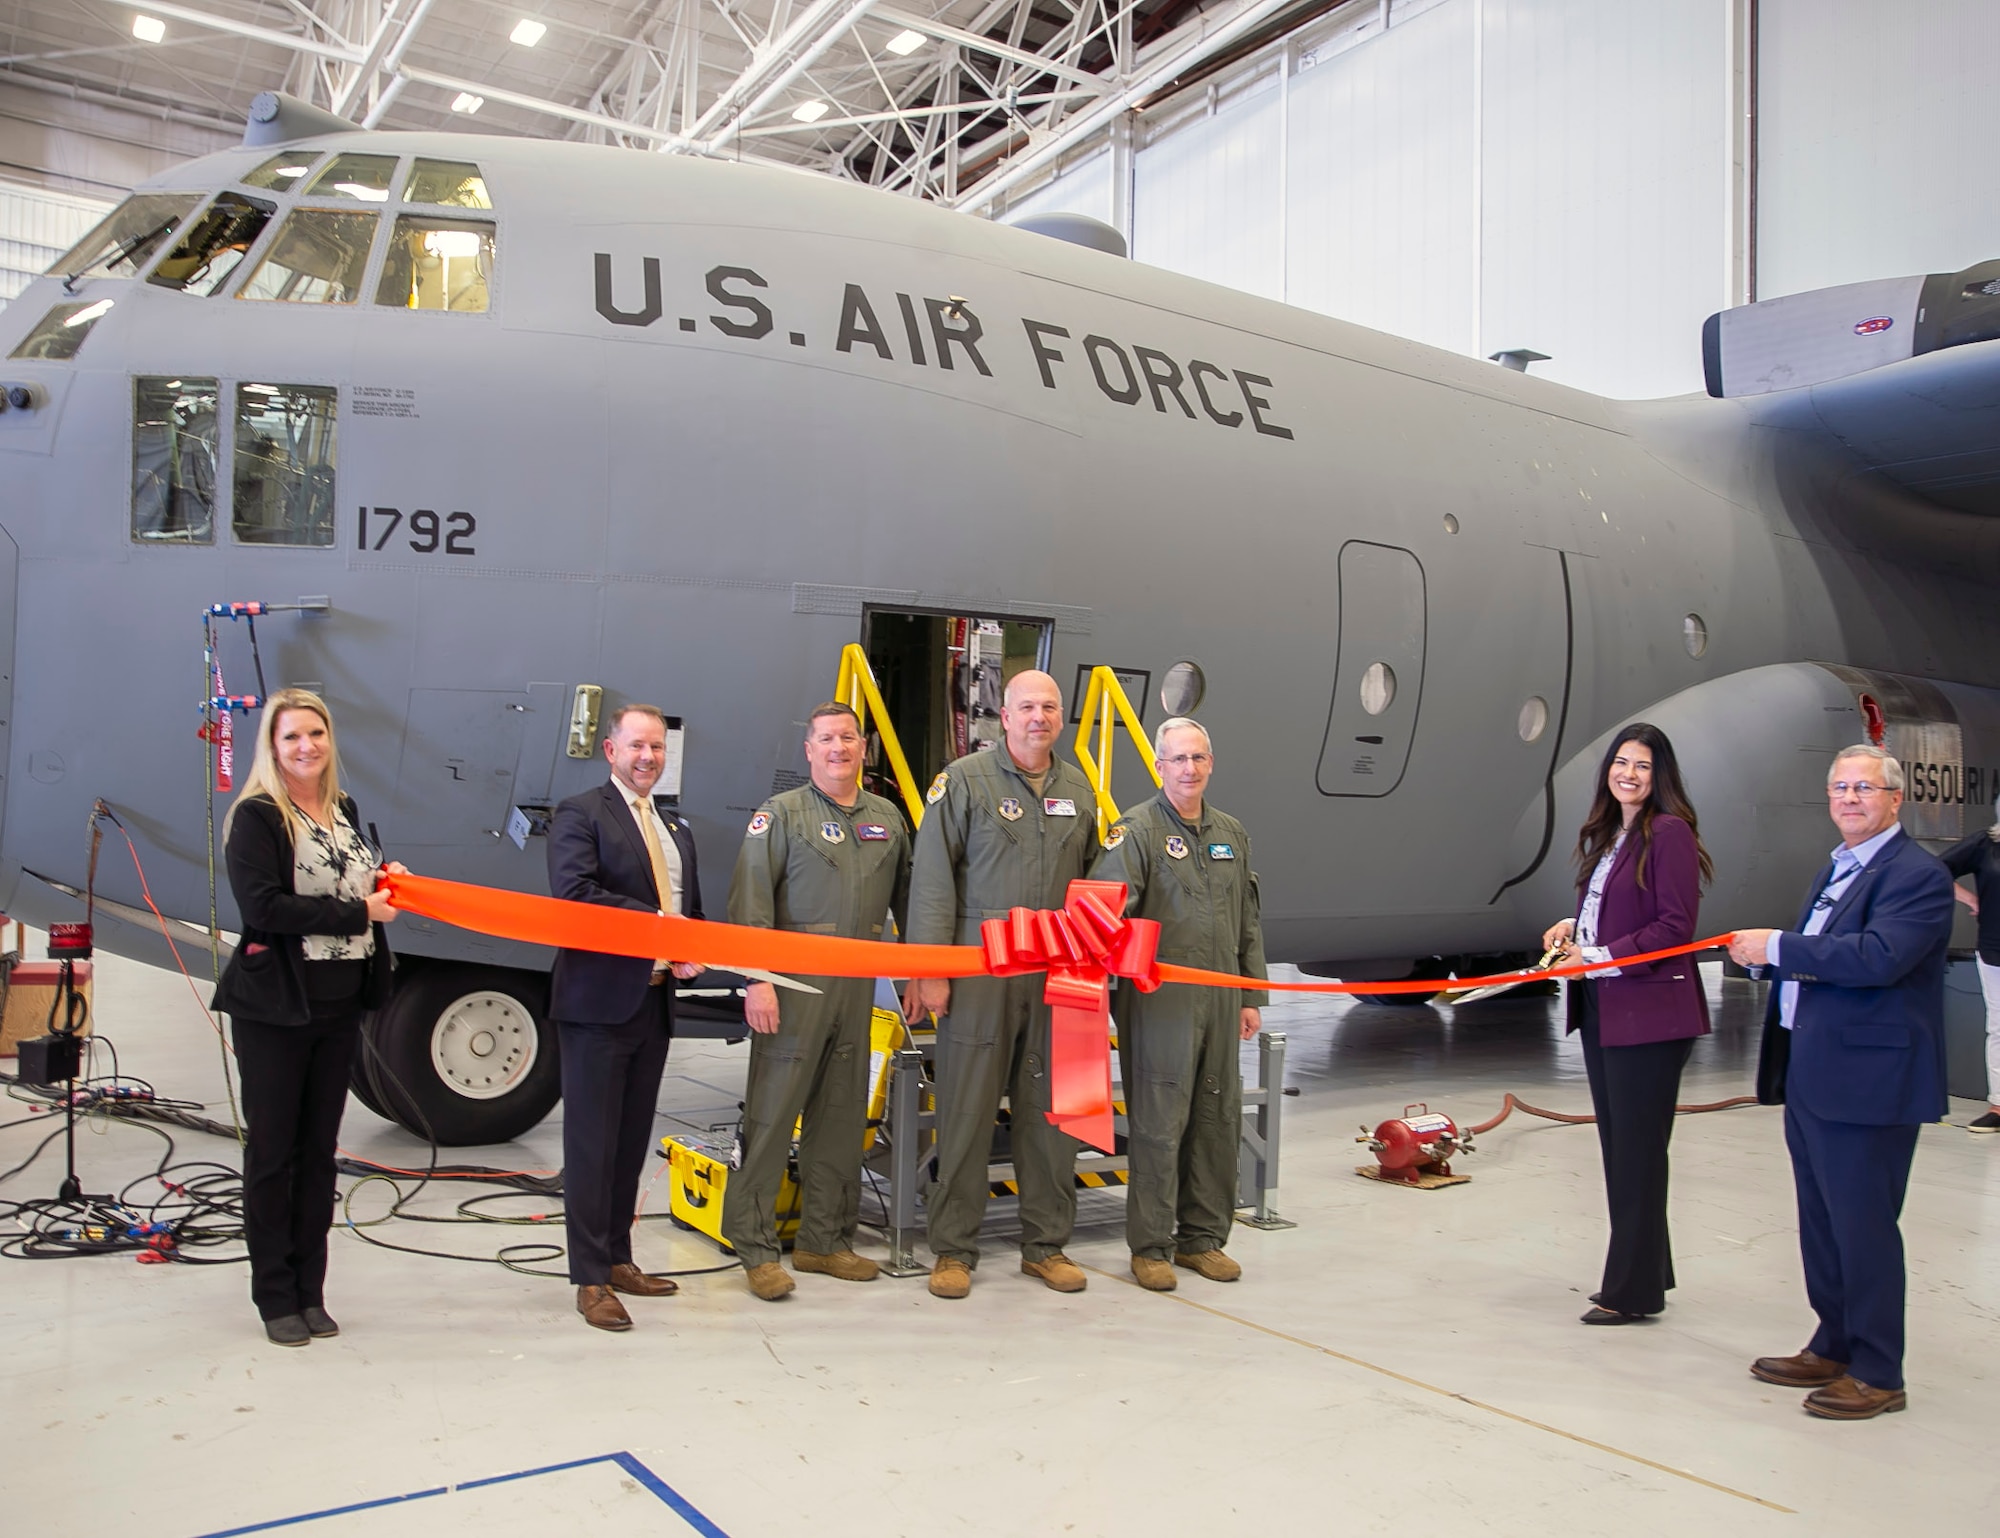 Pictured left to right:  Michelle Miller (L3H), Dr. Joseph Peloquin (C-130 Hercules Division), Col. John Cluck (139th Airlift Wing), Col. Dean Martin (189th Airlift Wing), Col. Barry Deibert (153rd Airlift Wing), Sara Tatsch (L3H) and David Norsworthy (L3H), during a ribbon cutting ceremony to mark the completion of the first Trial Kit Installation (TKI) onto a C-130H from the 139th Airlift Wing. (Courtesy photo)